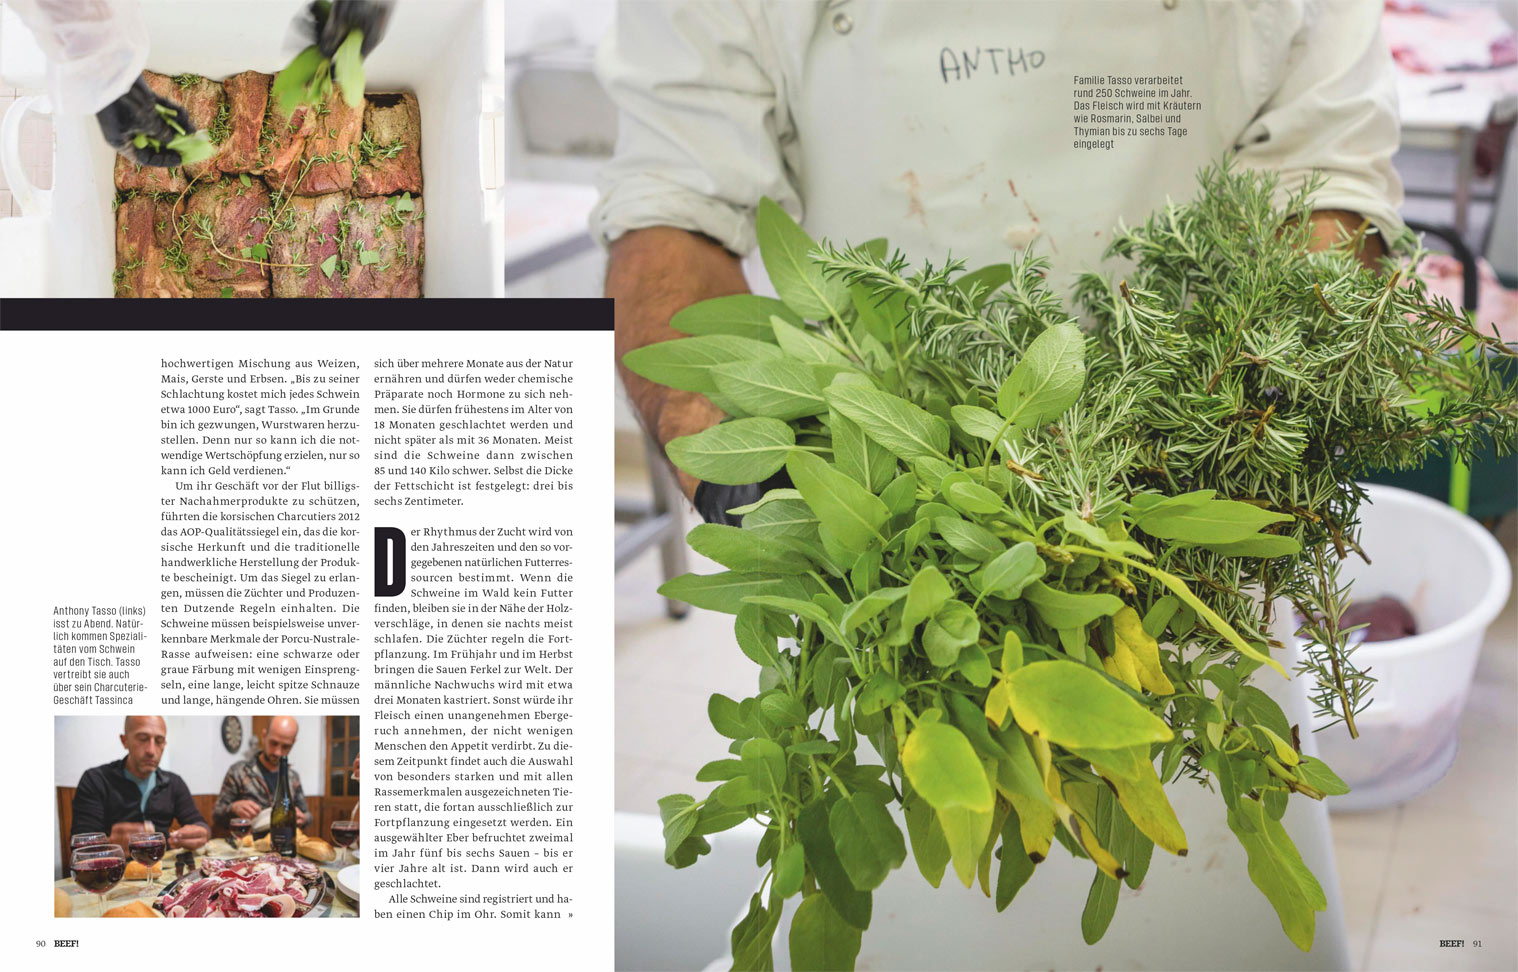 Double-page spread inside BEEF! magazine, showing photos and text